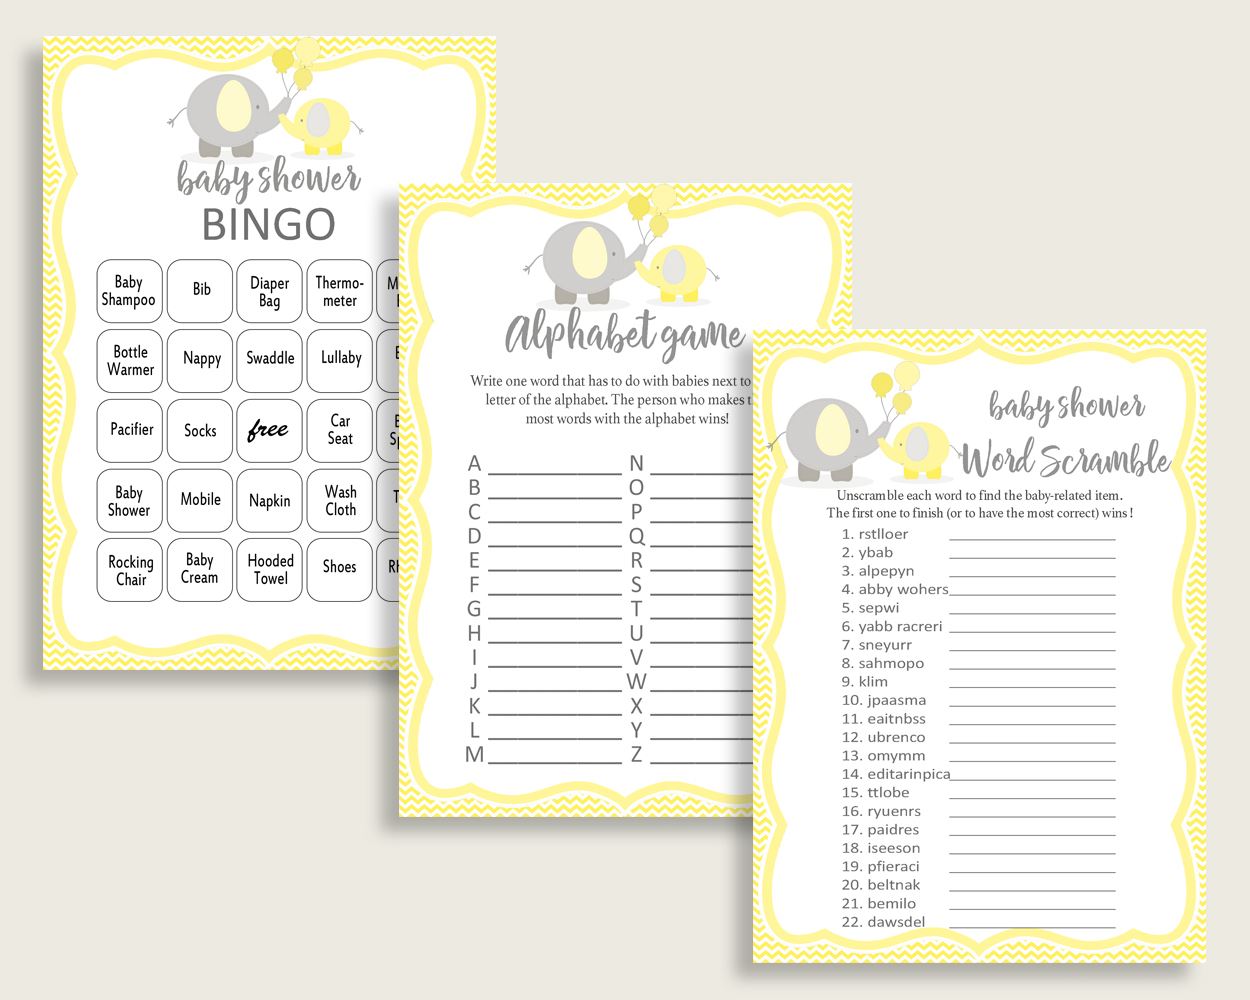 Games Baby Shower Games Yellow Baby Shower Games Baby Shower Elephant Games Yellow Gray party organizing printables party decor party W6ZPZ